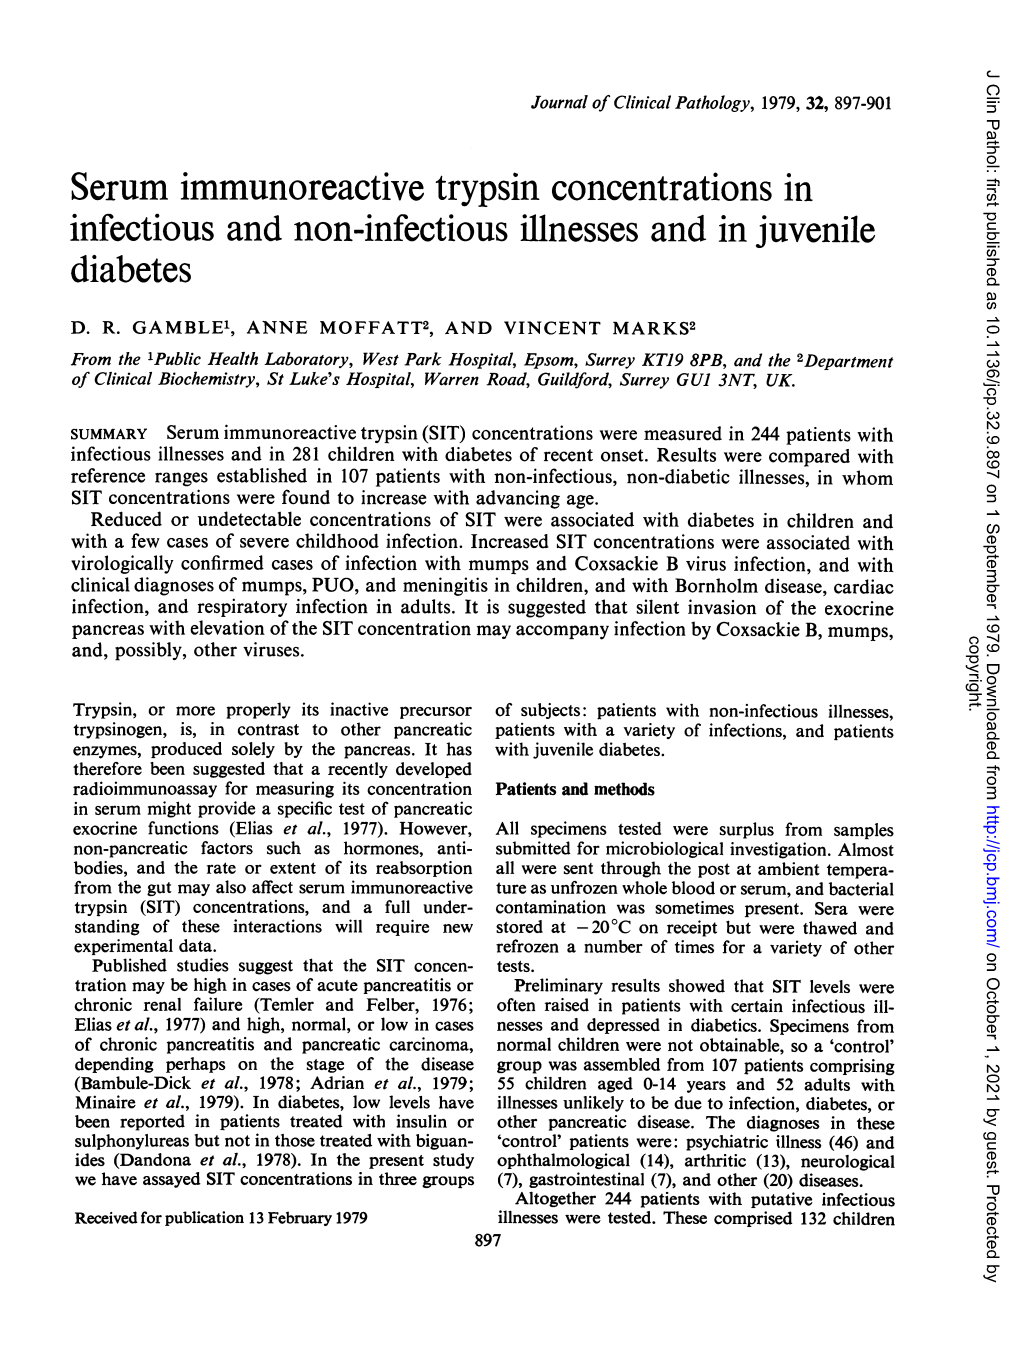 Serum Immunoreactive Trypsin Concentrations in Infectious and Non-Infectious Illnesses and in Juvenile Diabetes